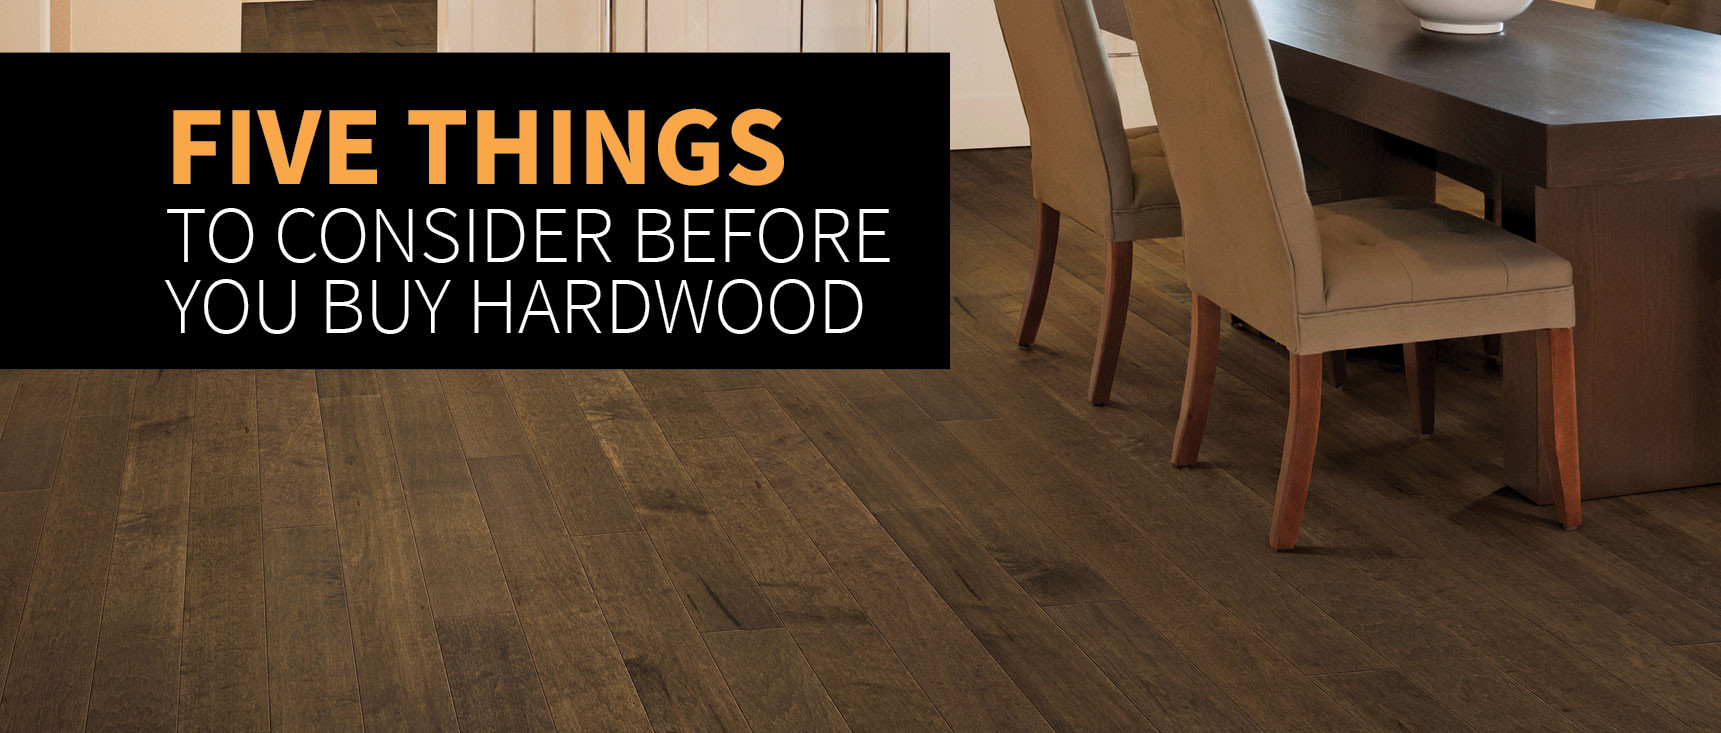 hardwood floor refinishing niagara region of welcome to end of the roll brand name flooring low prices always pertaining to flooring